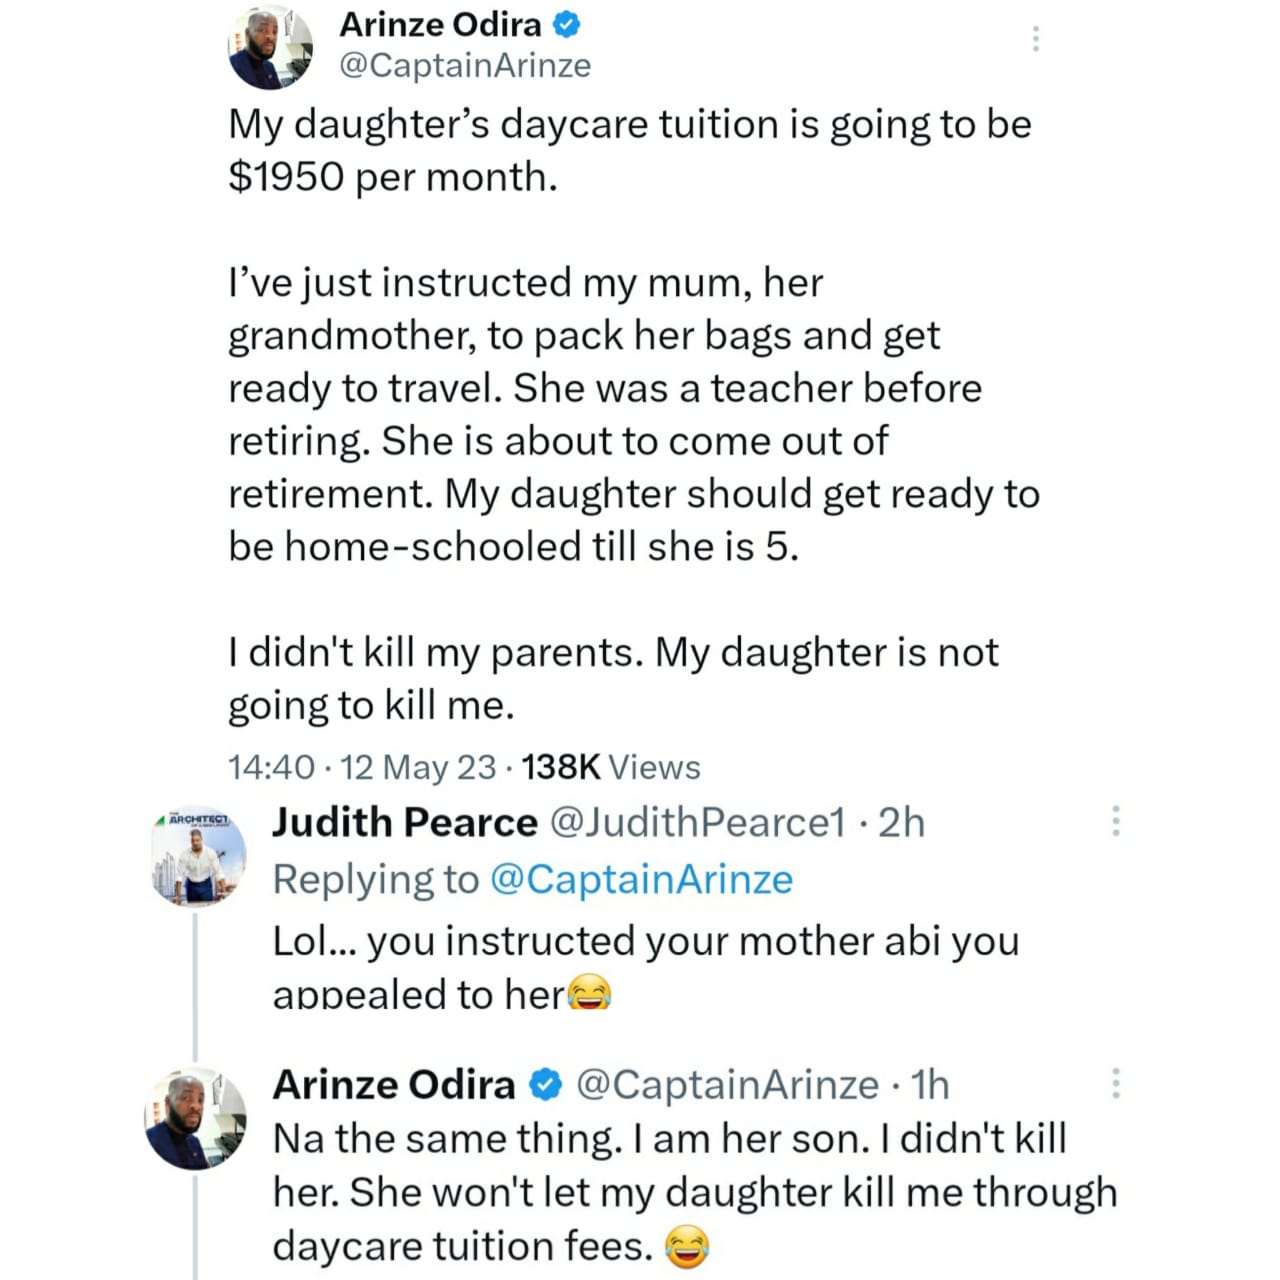 My daughter won?t kill me through daycare tuition fees - Abroad-based Nigerian pilot reveals his daughter?s daycare fees made him invite his mother